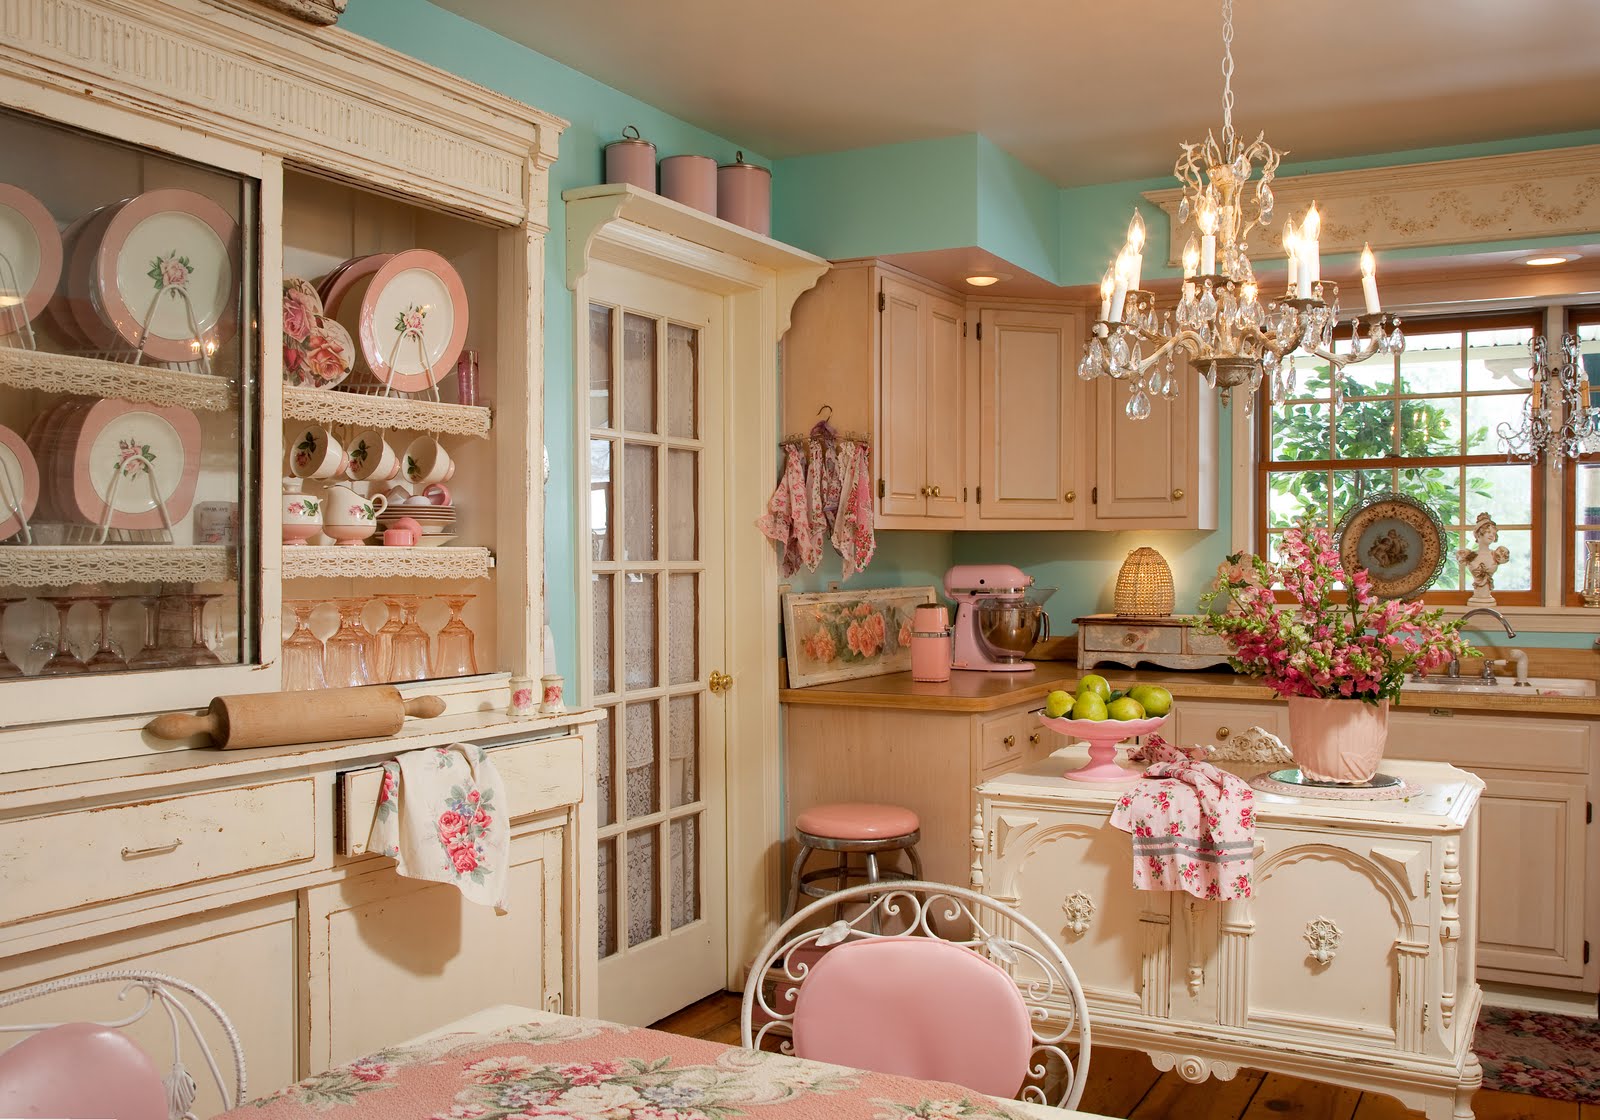 Interior Lovely Shabby Chic Decorating Kitchen And Dining Room With White Pink And Blue Most Wanted Shabby Chic Furniture And Decorating Ideas 